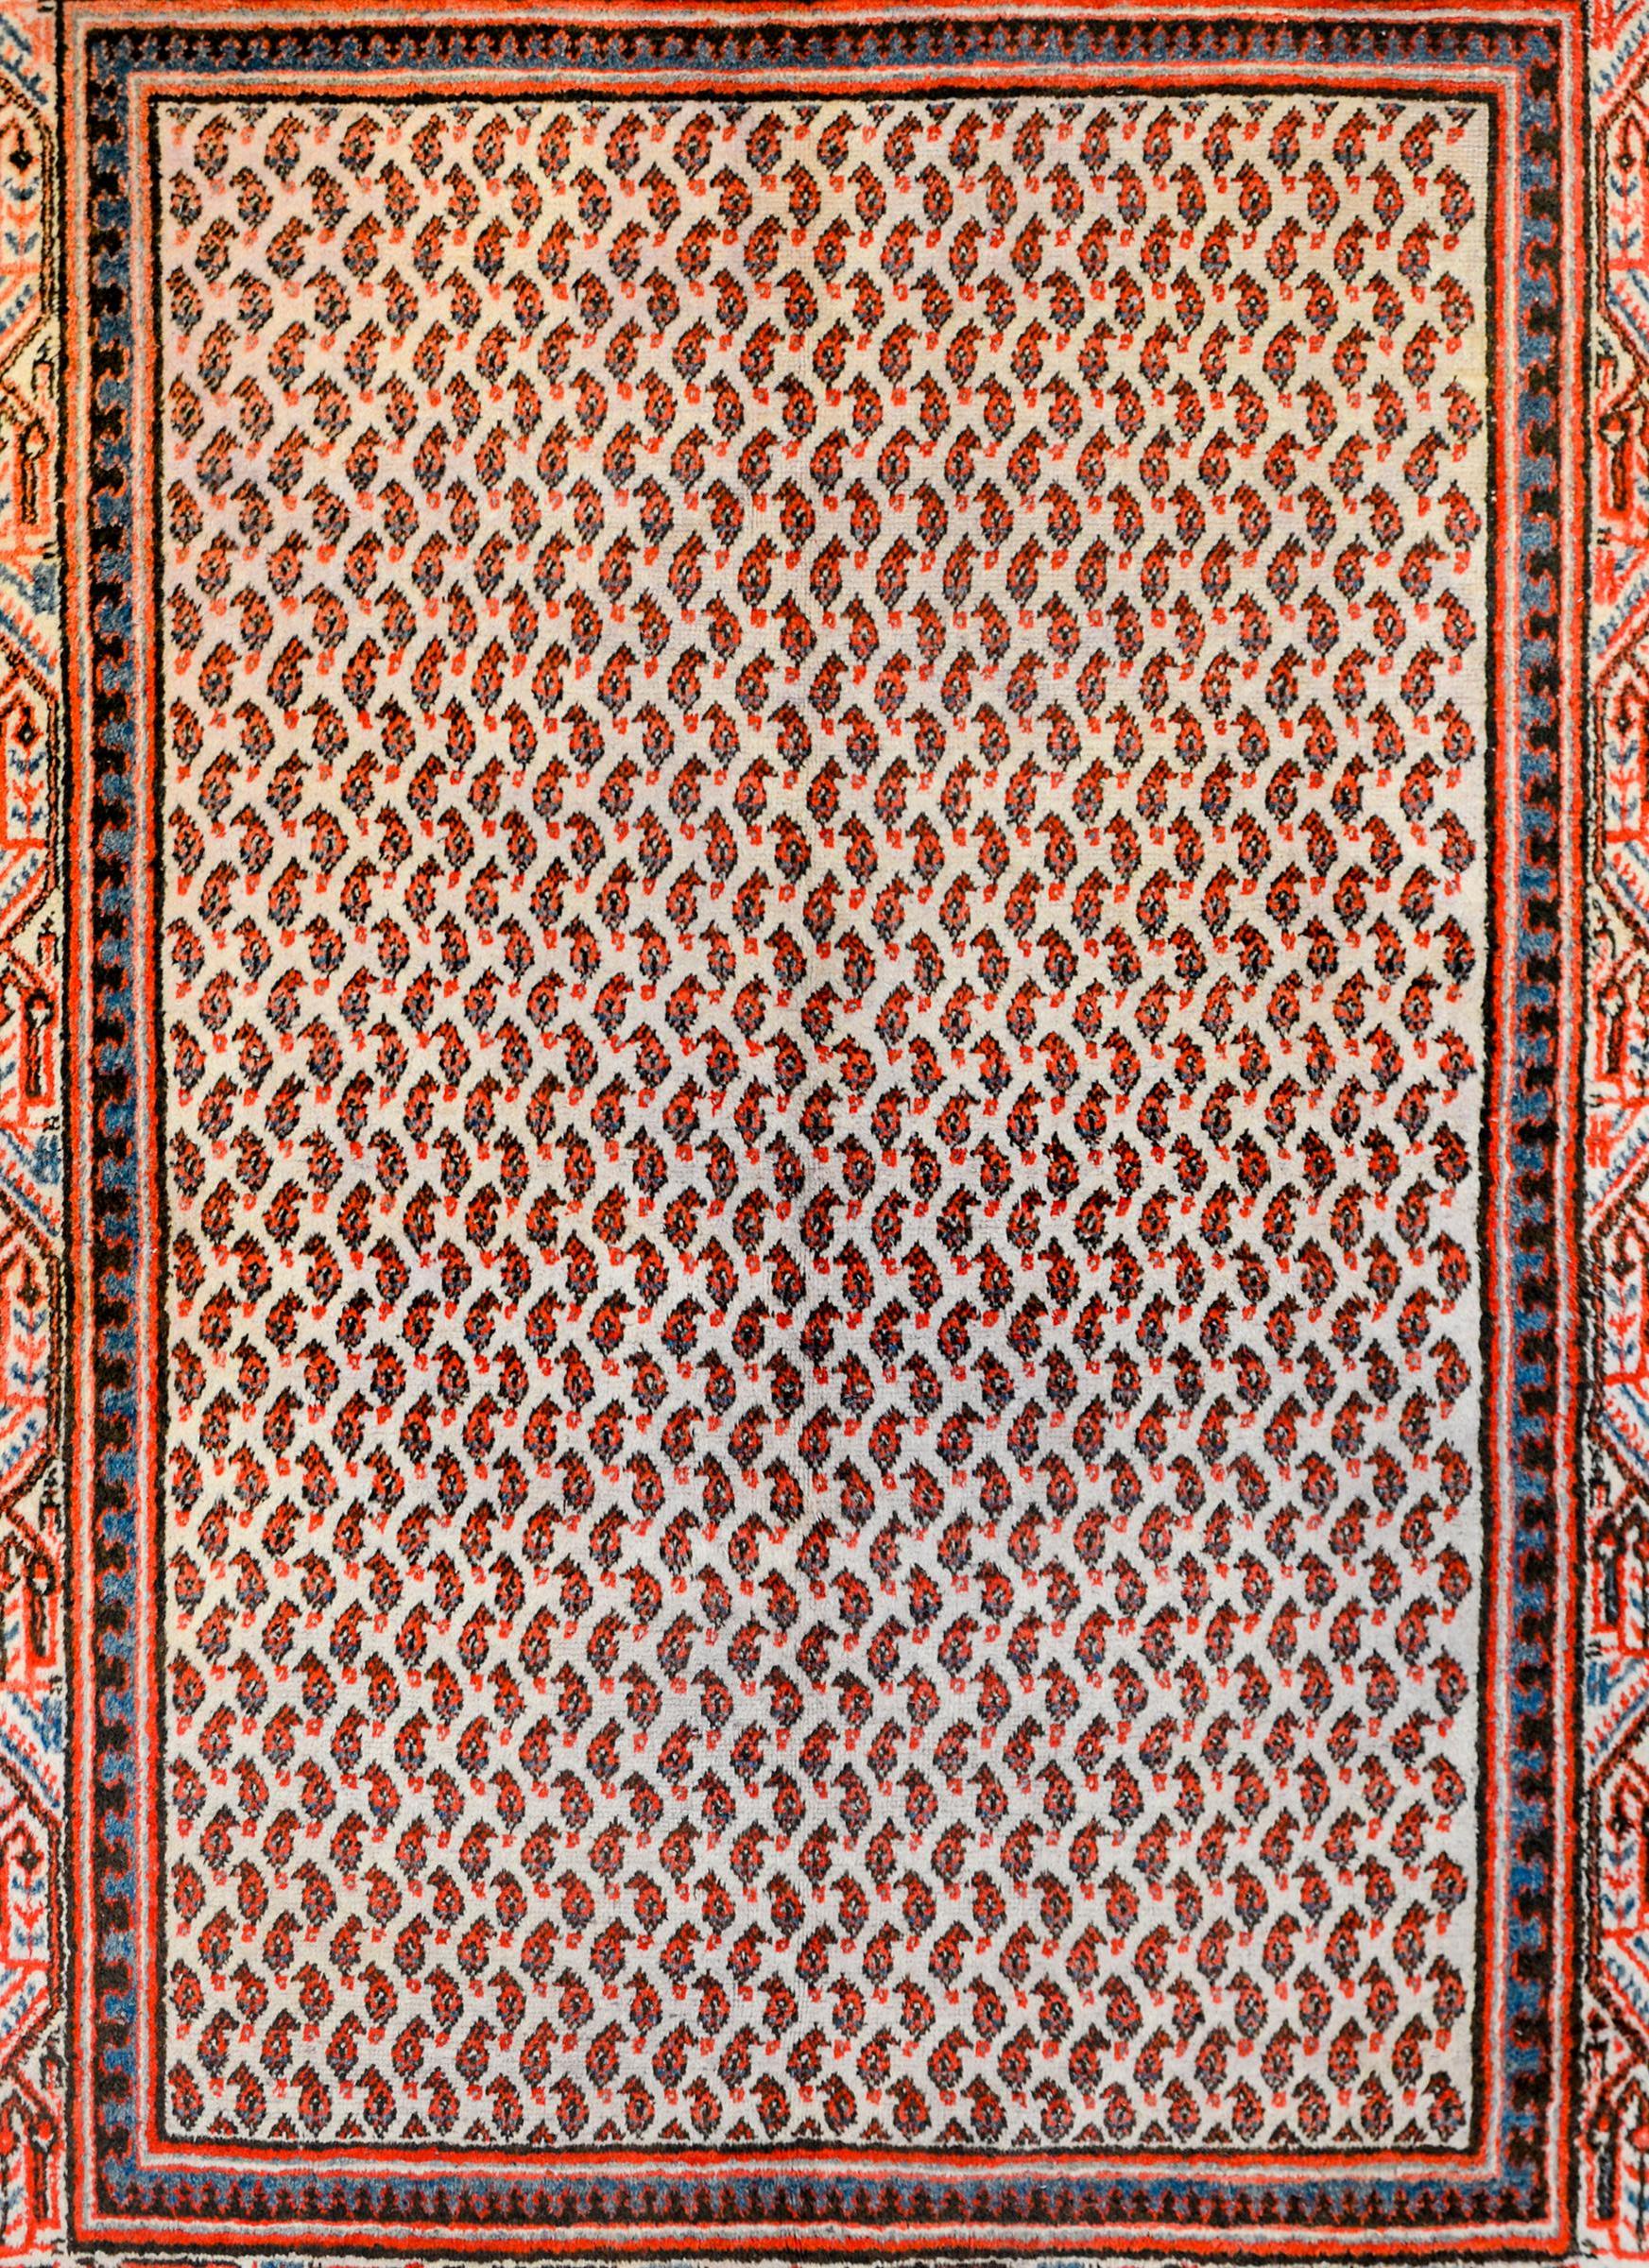 An exquisite vintage Persian Seraband rug with a beautiful all-over paisley pattern rendered in crimson, coral, and indigo, on a white colored background. The border is beautiful, with a stylized floral and willow tree pattern flanked by matching